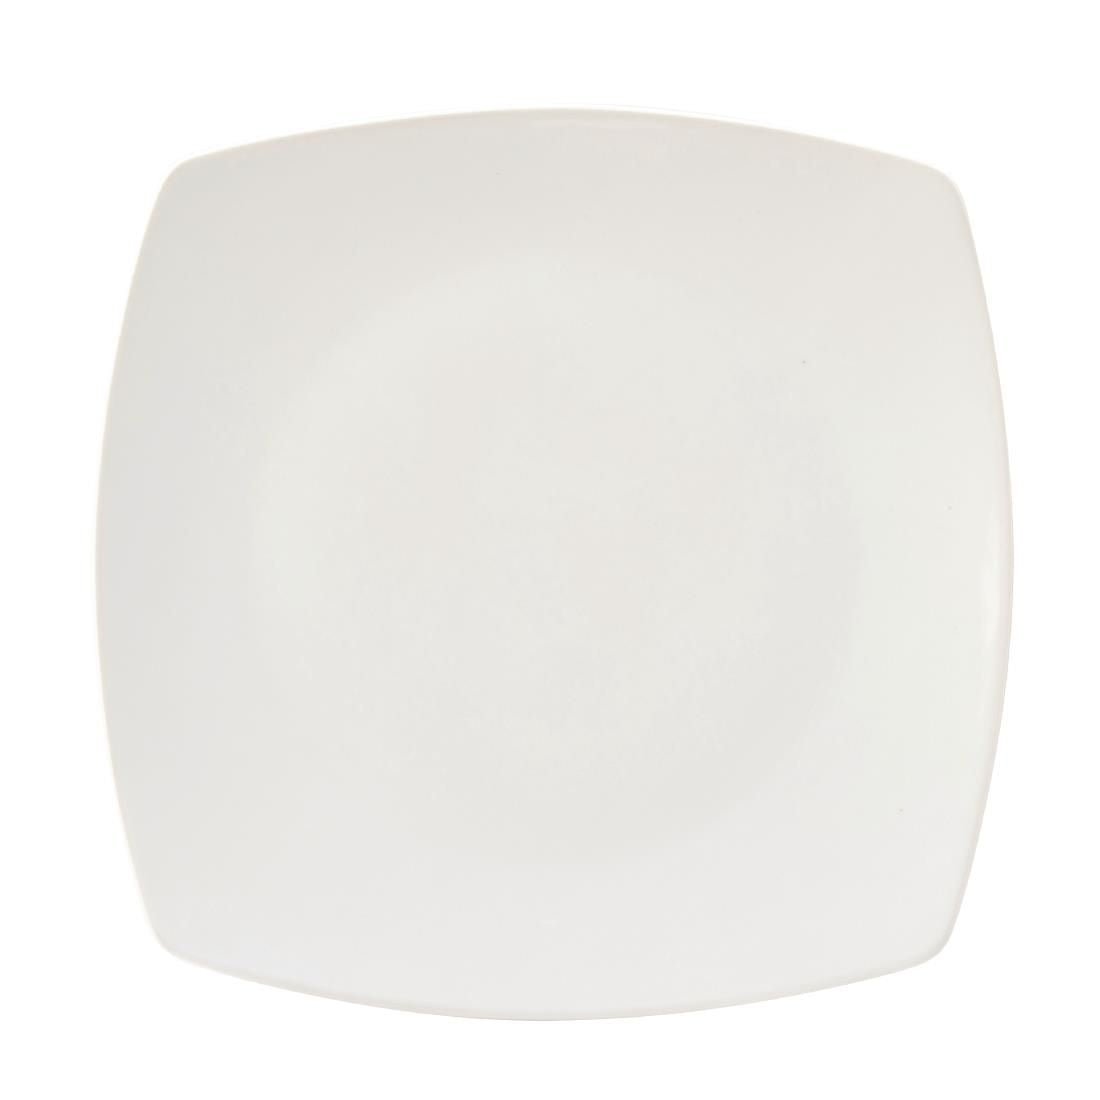 CW347 Utopia Titan Rounded Square Plates White 270mm (Pack of 6) JD Catering Equipment Solutions Ltd